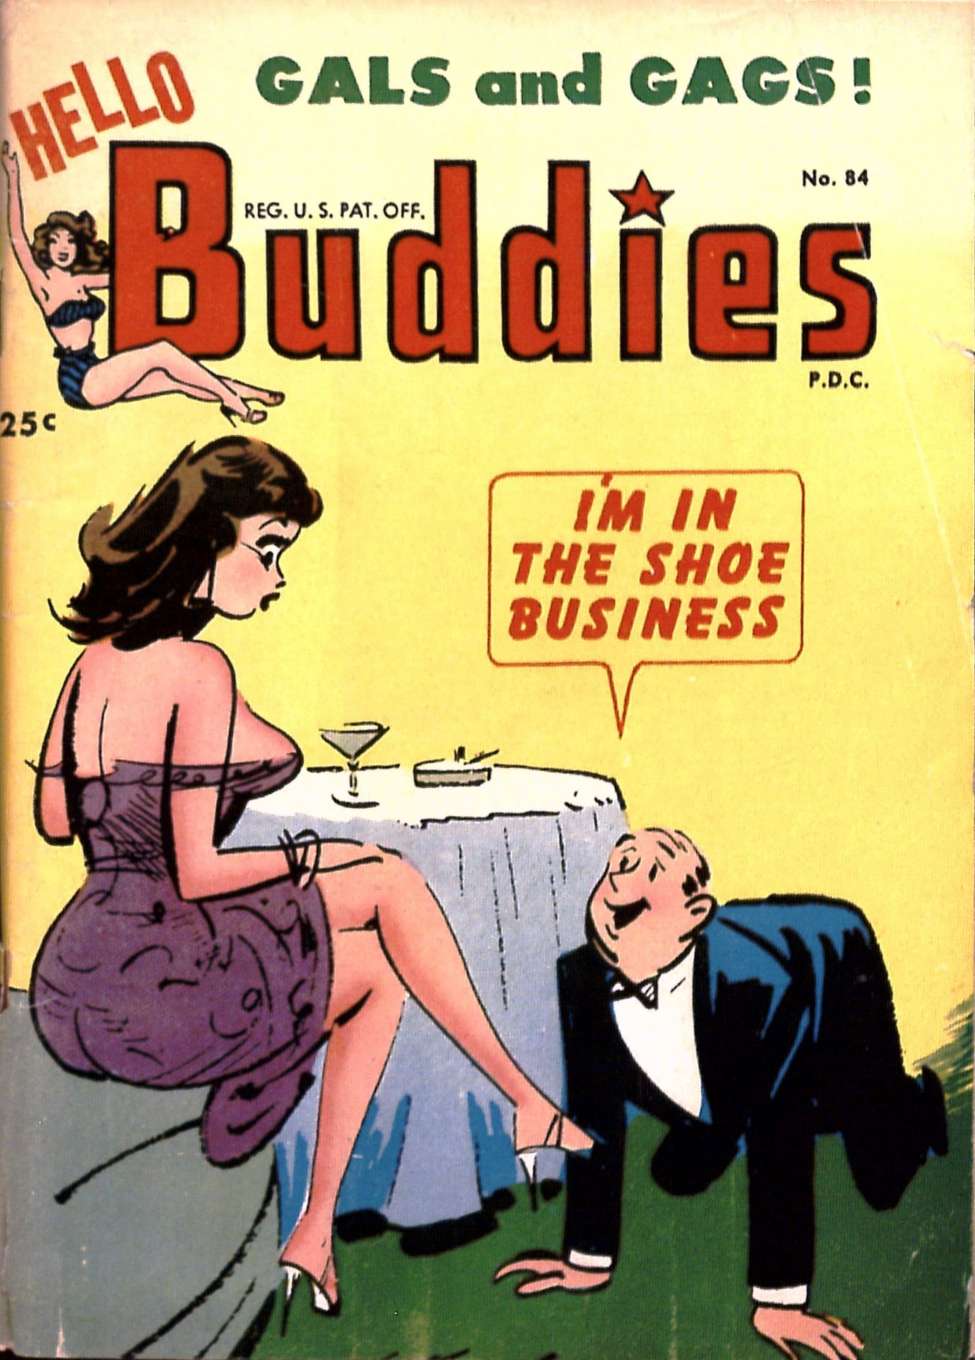 Comic Book Cover For Hello Buddies 84